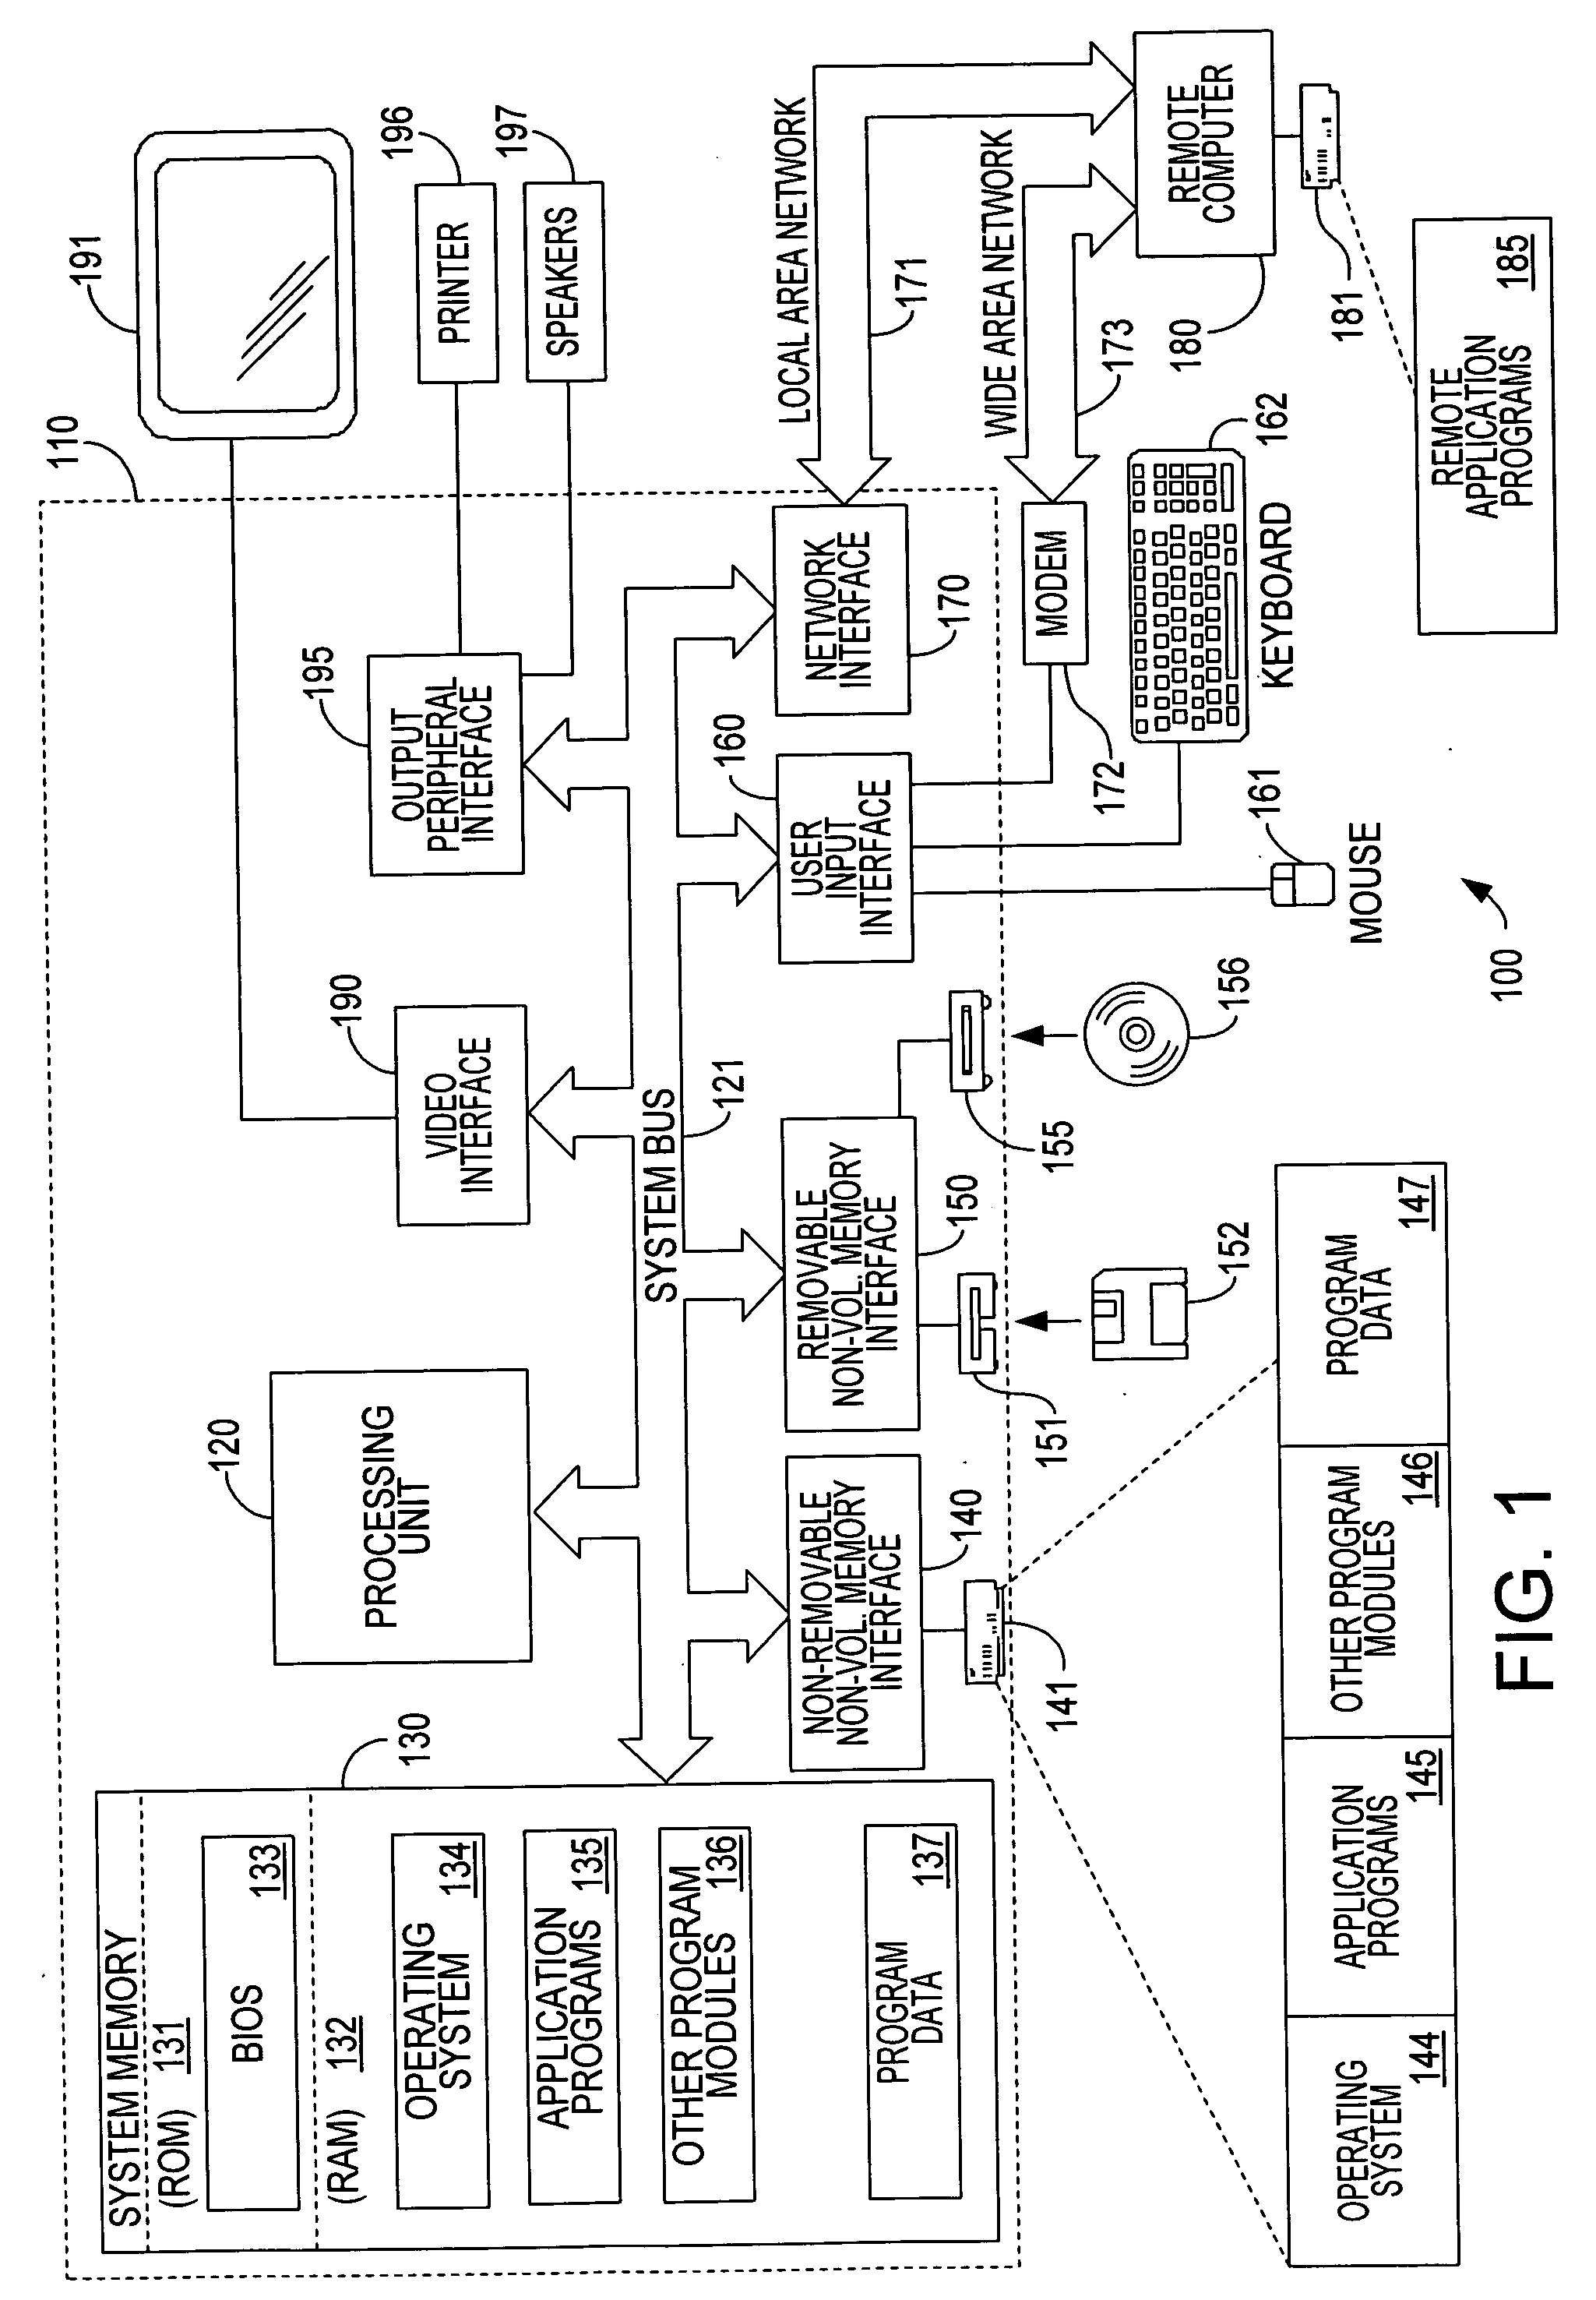 Method and system for assessing performance of a video interface using randomized parameters